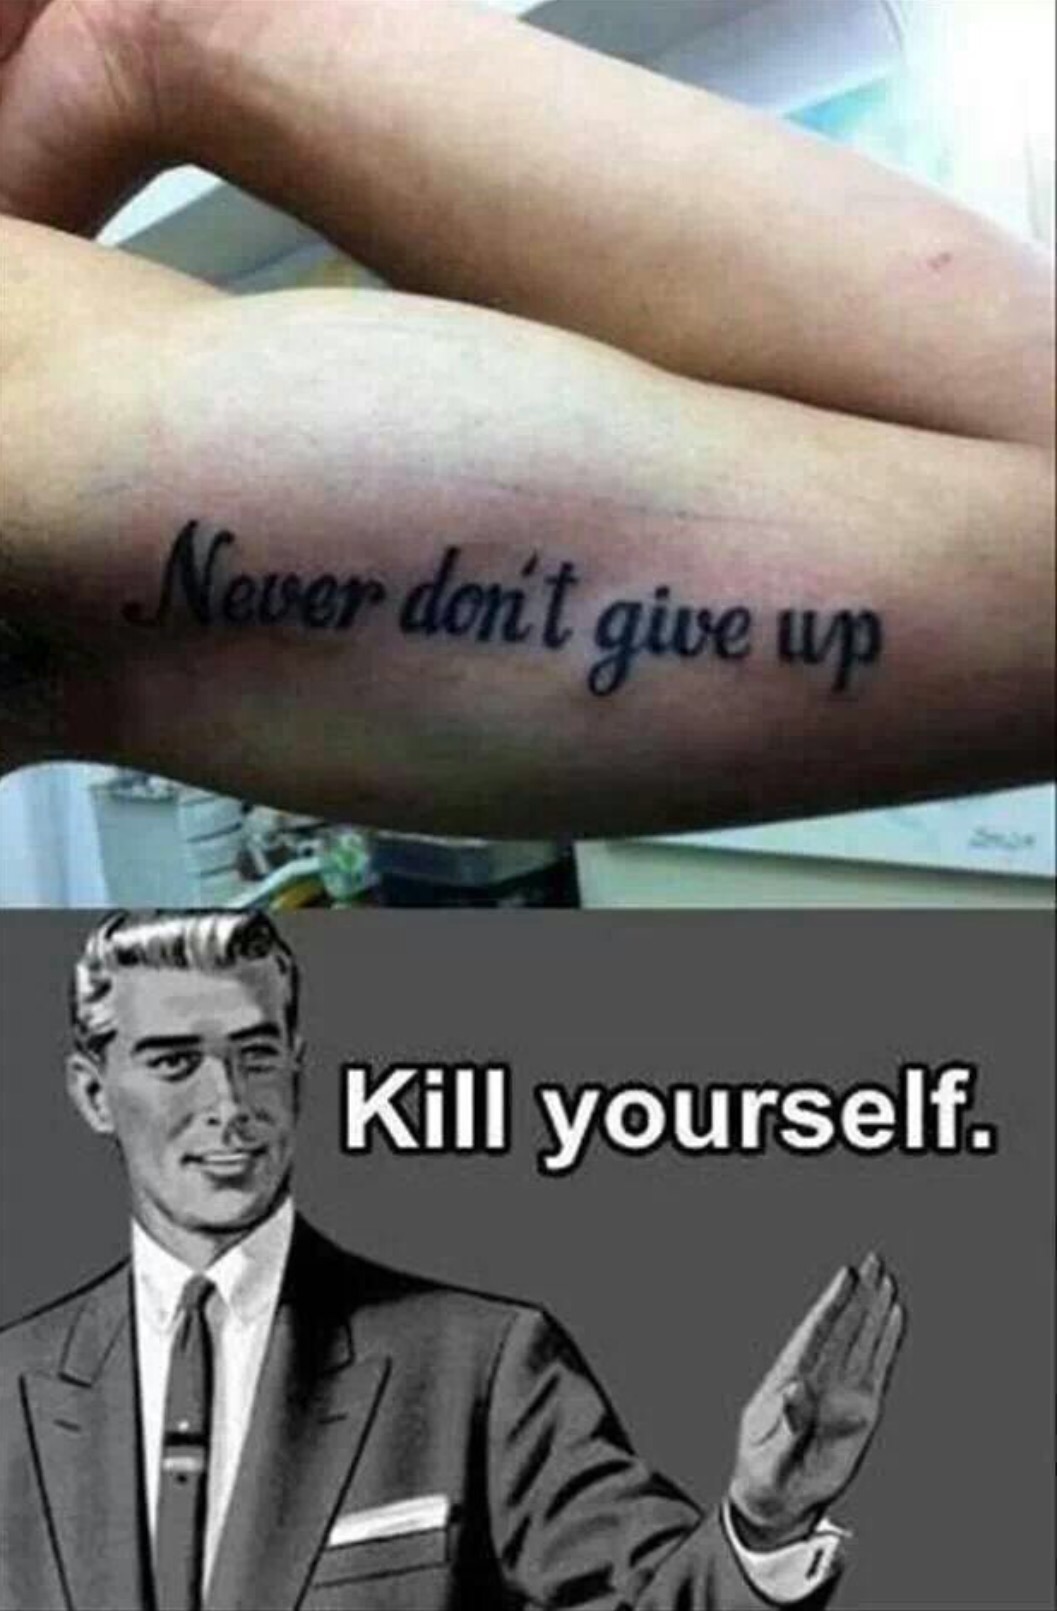 7 reasons why people shouldn’t get a tattoo.